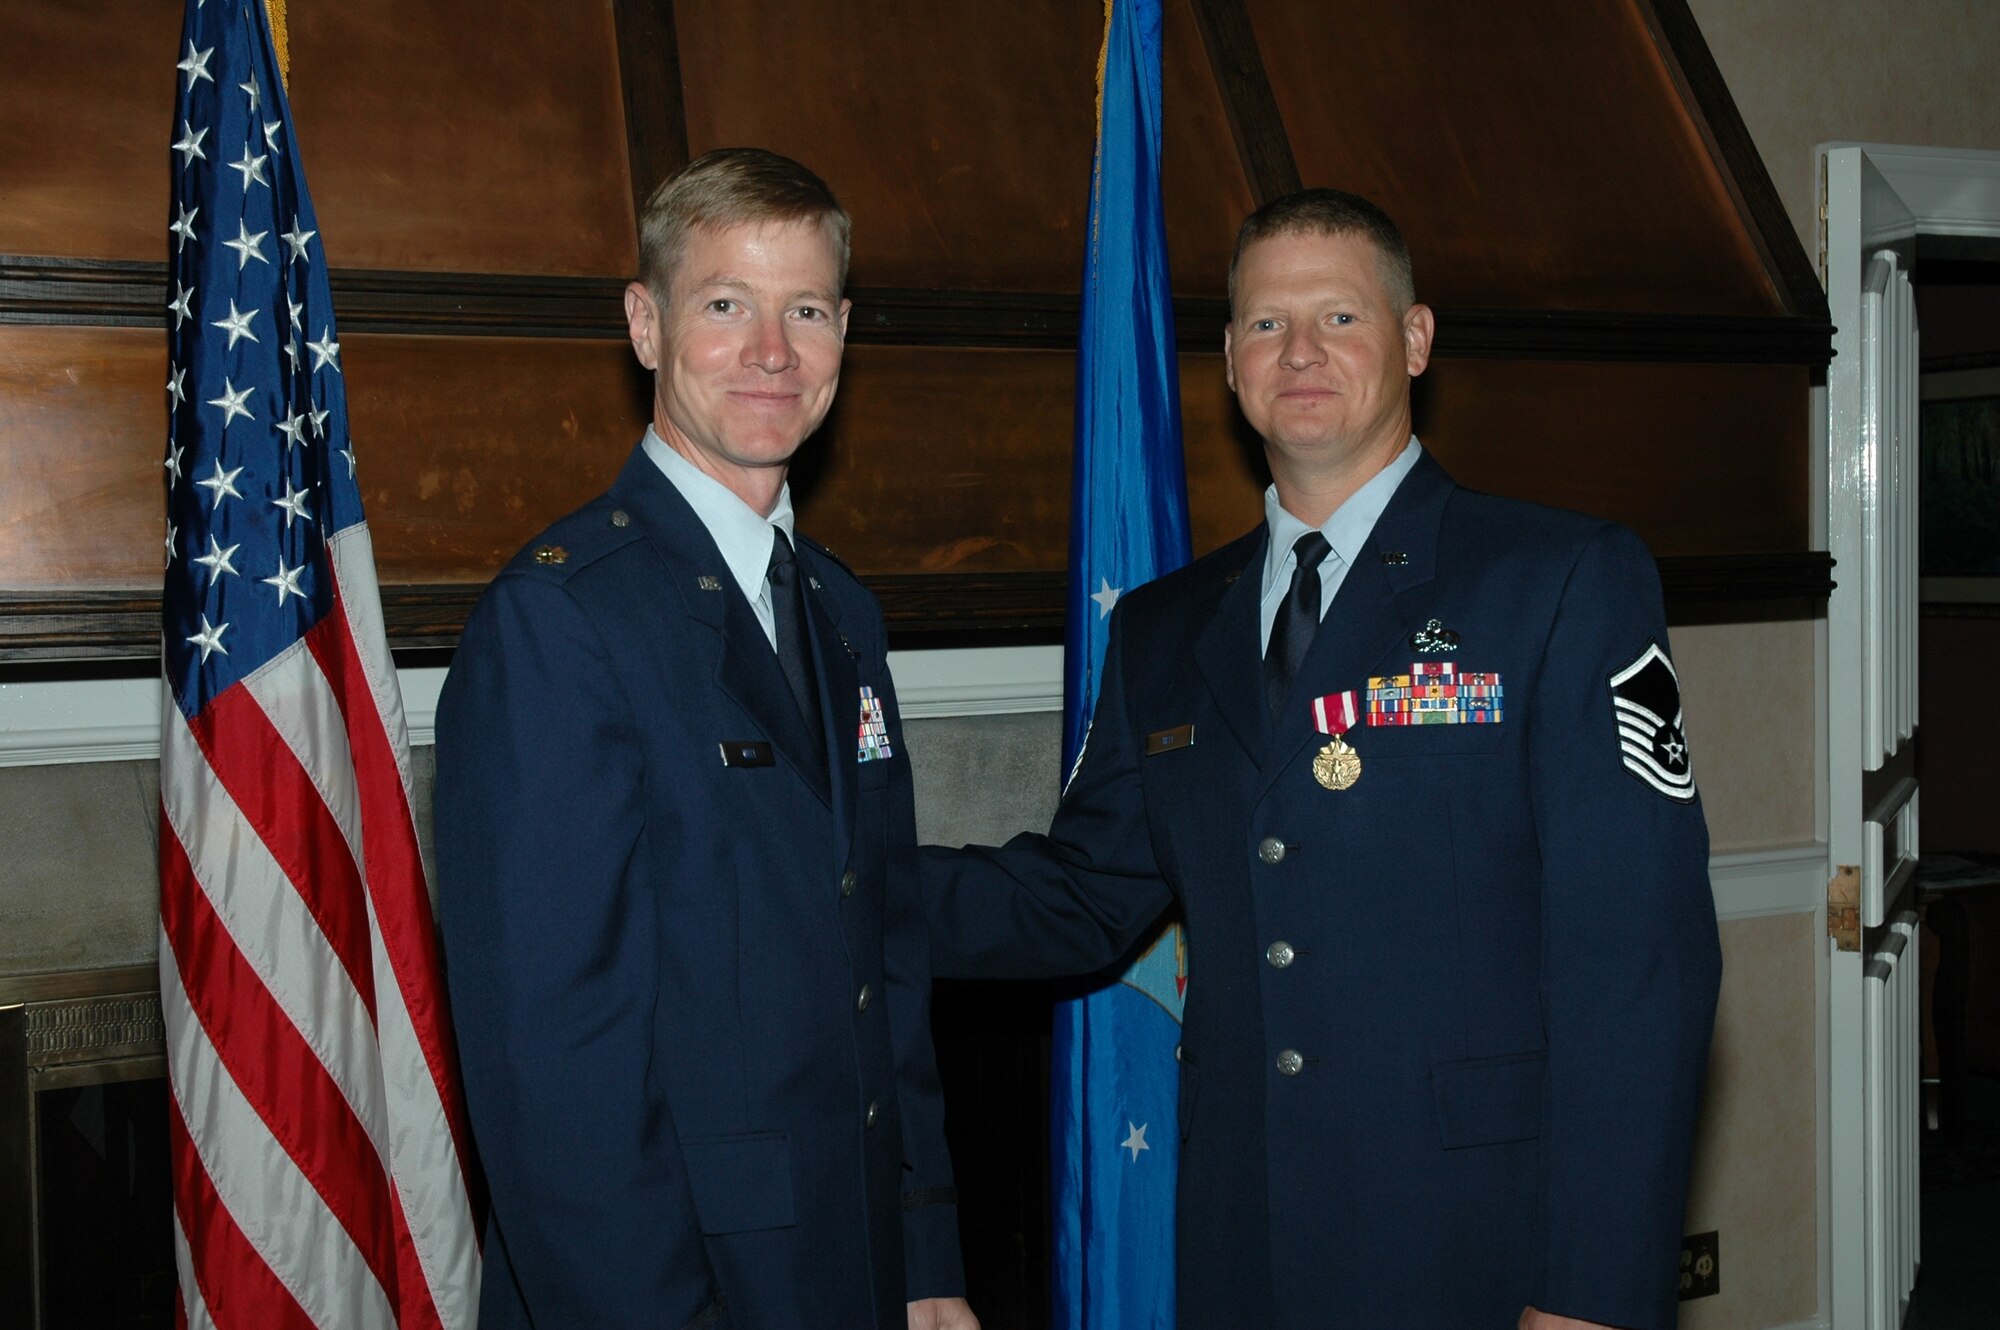 Lt. Col. Dan Witt (left) attended brother Charlie’s retirement ceremony in September 2007. Their plans to run the 2008 U.S. Air Force Marathon together ended when Colonel Witt died in an aircraft accident. (Courtesy photo)